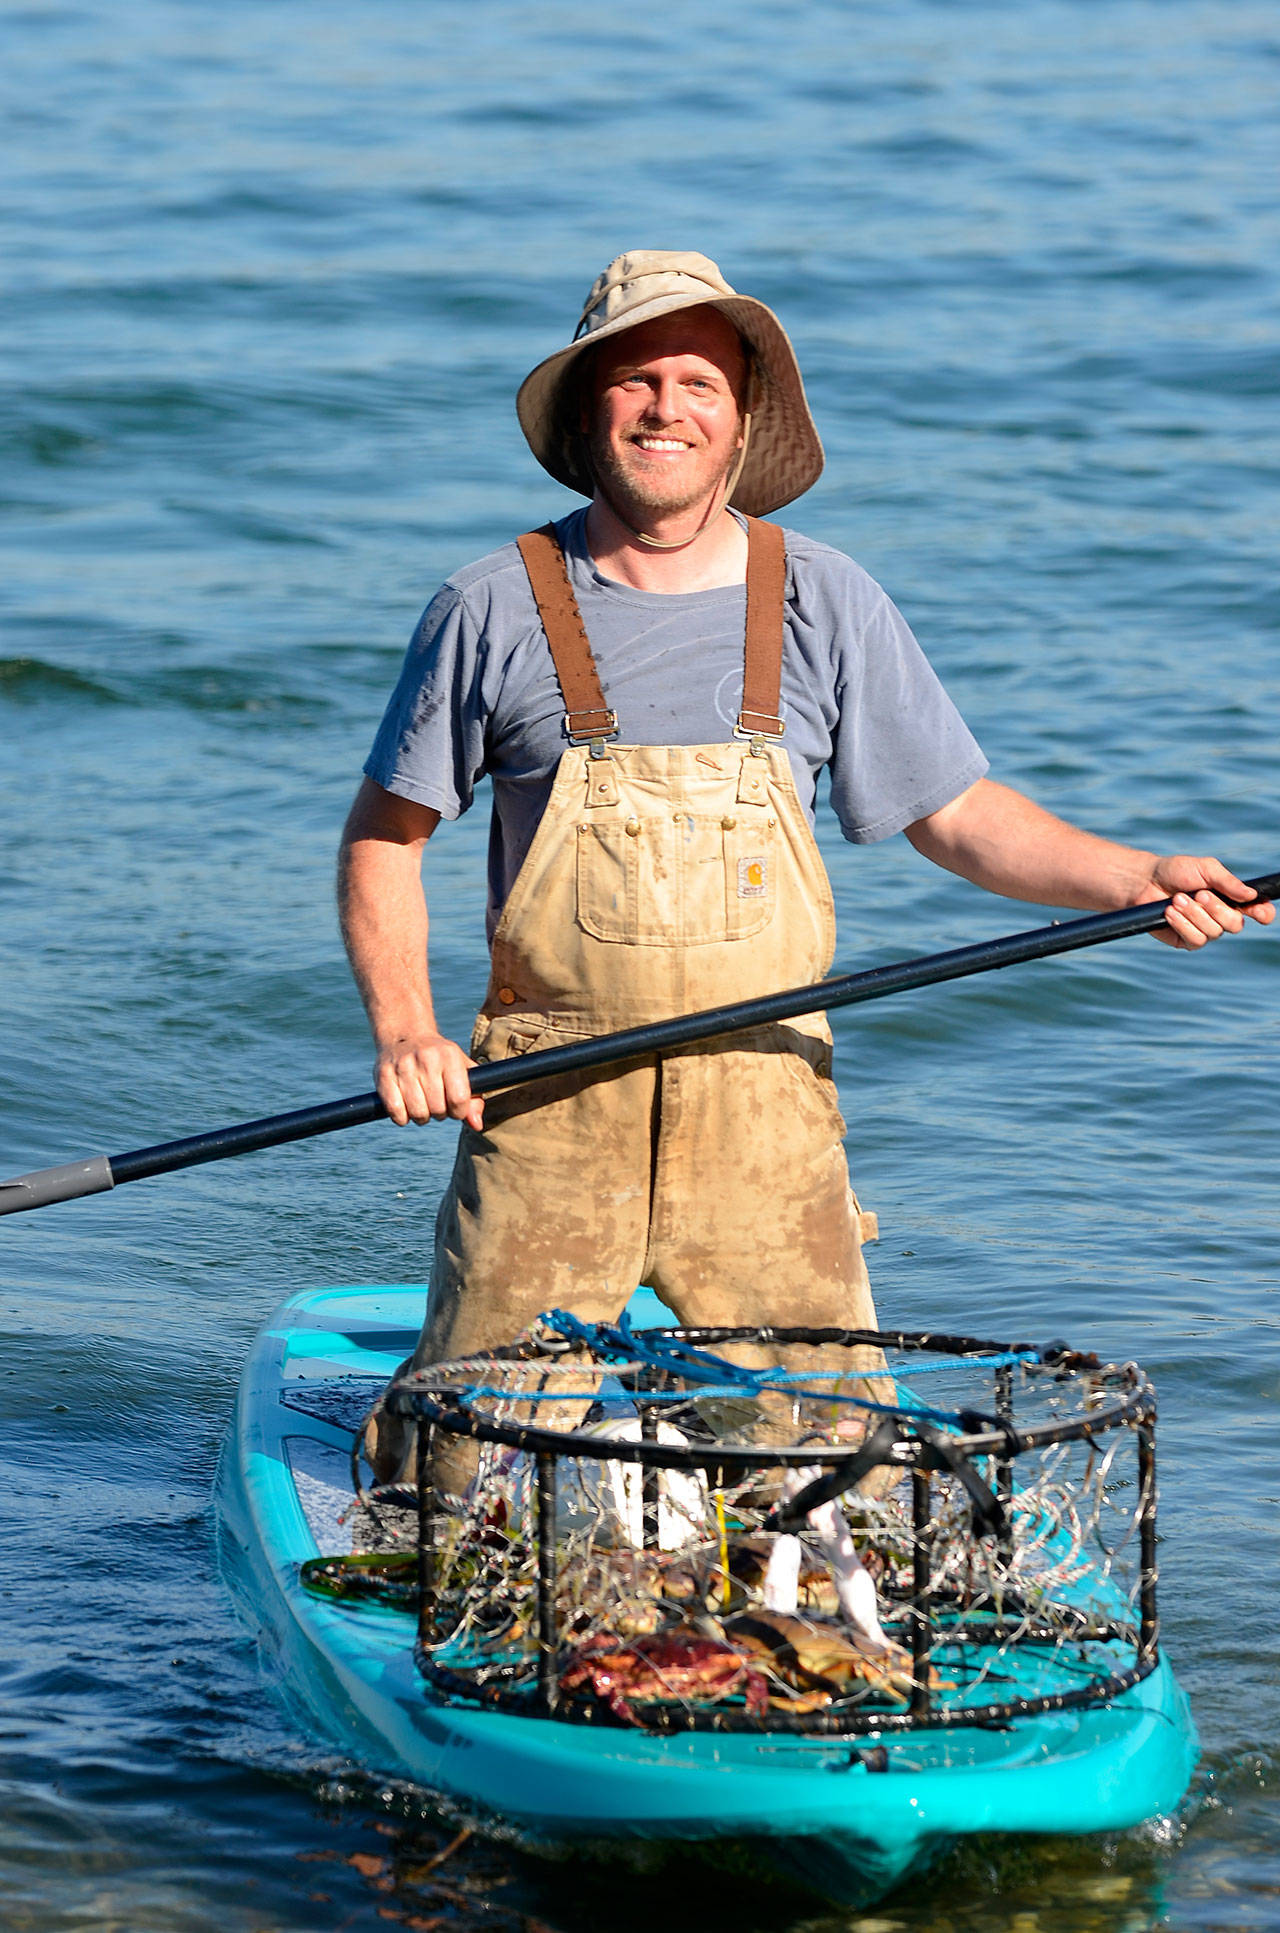 Justin Burnett / The Record — Stewart chose to drop and collect his crab pots with a paddleboard after realizing it was quicker and more environmentally friendly.